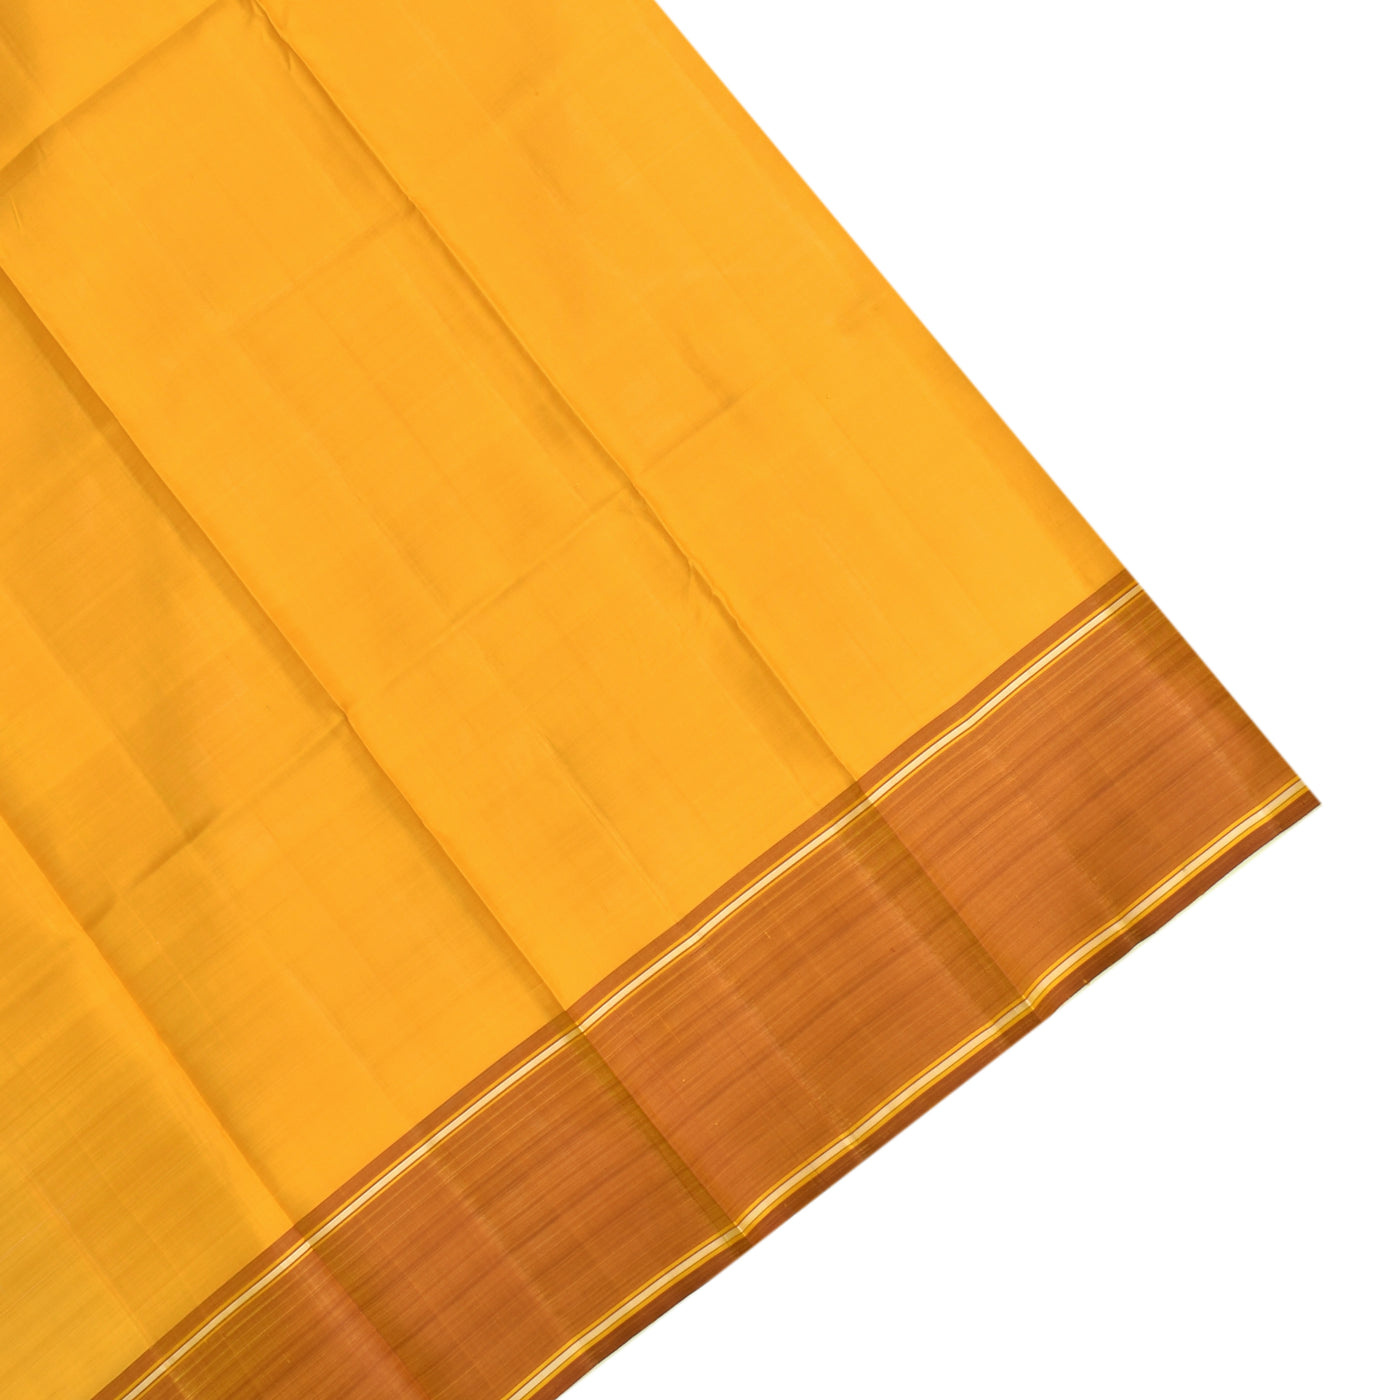 Off White Hand Painted Kanchi Silk Saree with Flower Design